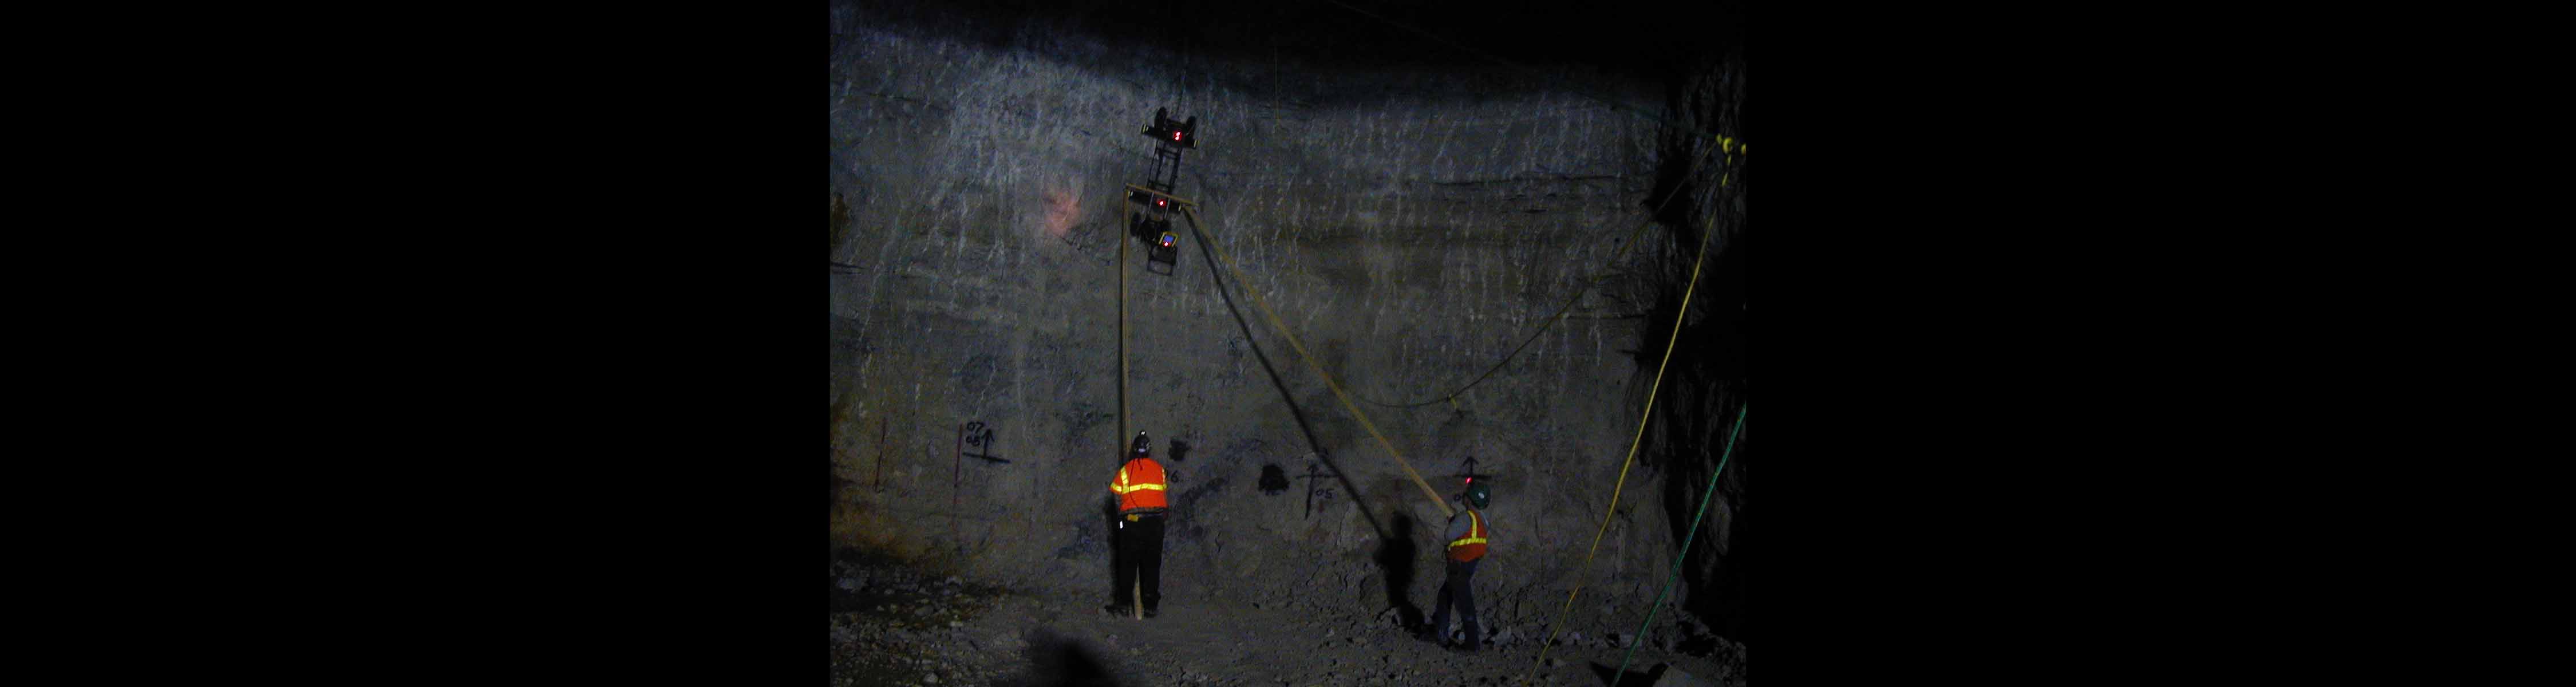 GPR for Voids and Fractures in a Mine Wall